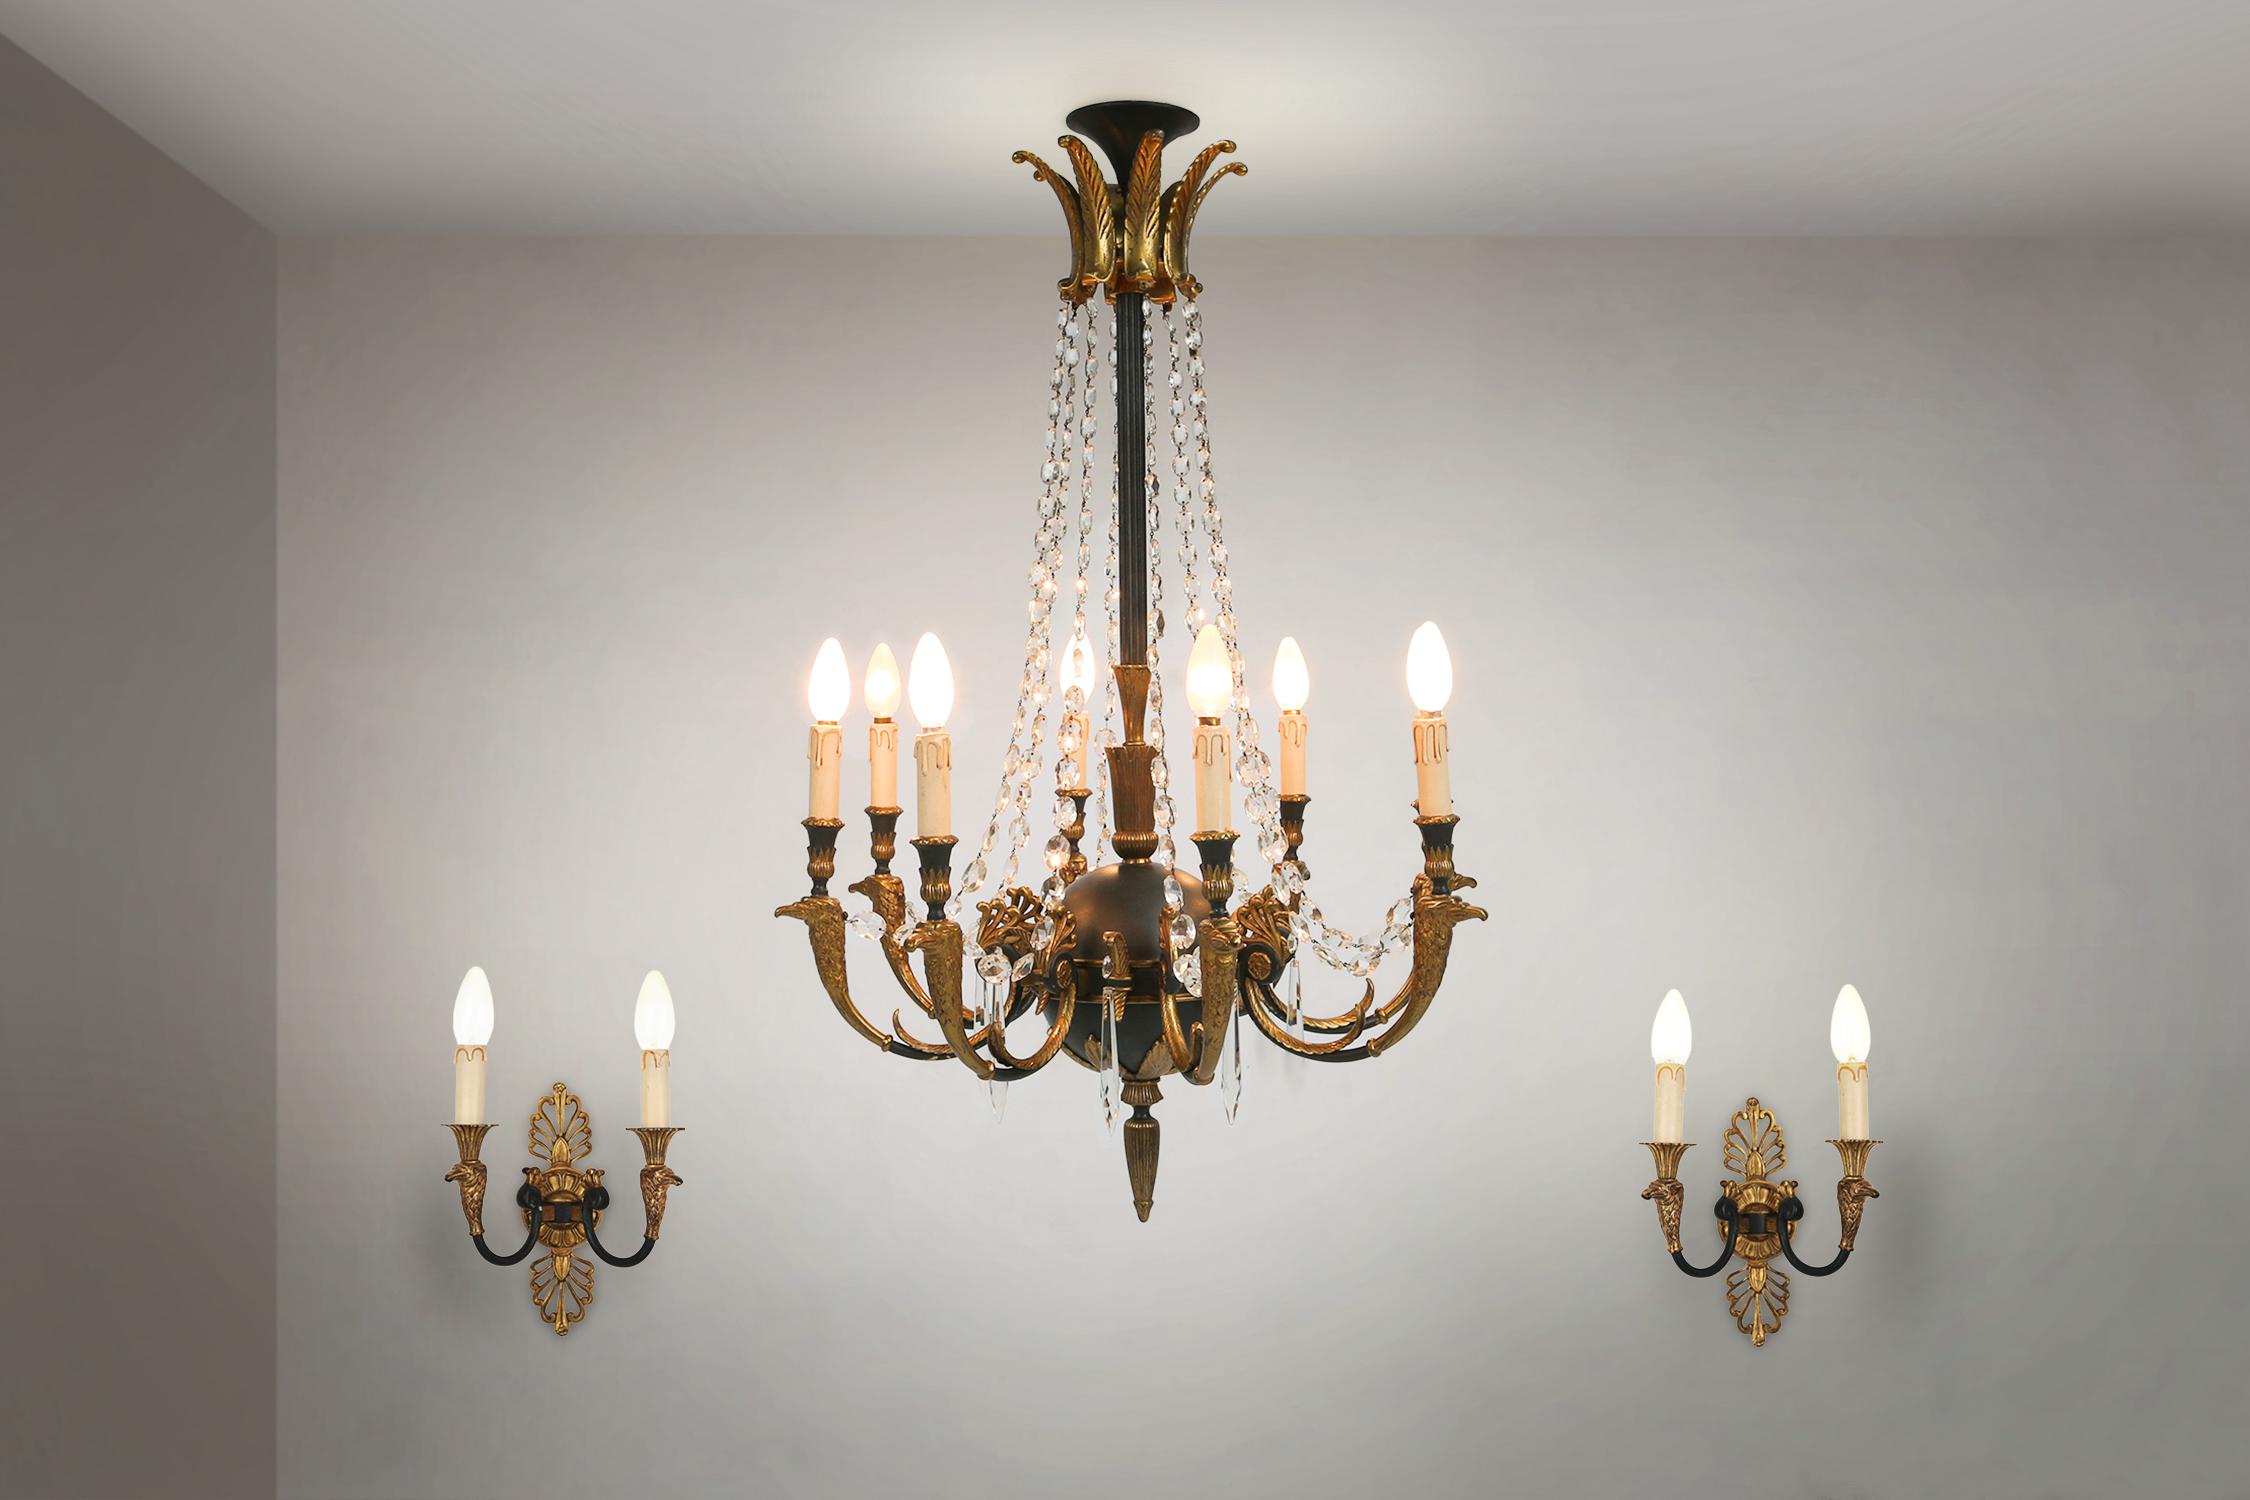 Belgium / 1950 / chandelier or pendant lamp with 2 wall lamps / bronze and glass / empire

A beautiful set containing a large Chandelier with 8 light arms and 2 wall lights with each 2 arms. Made in bronze in Belgium in the 1950s in Empire style.